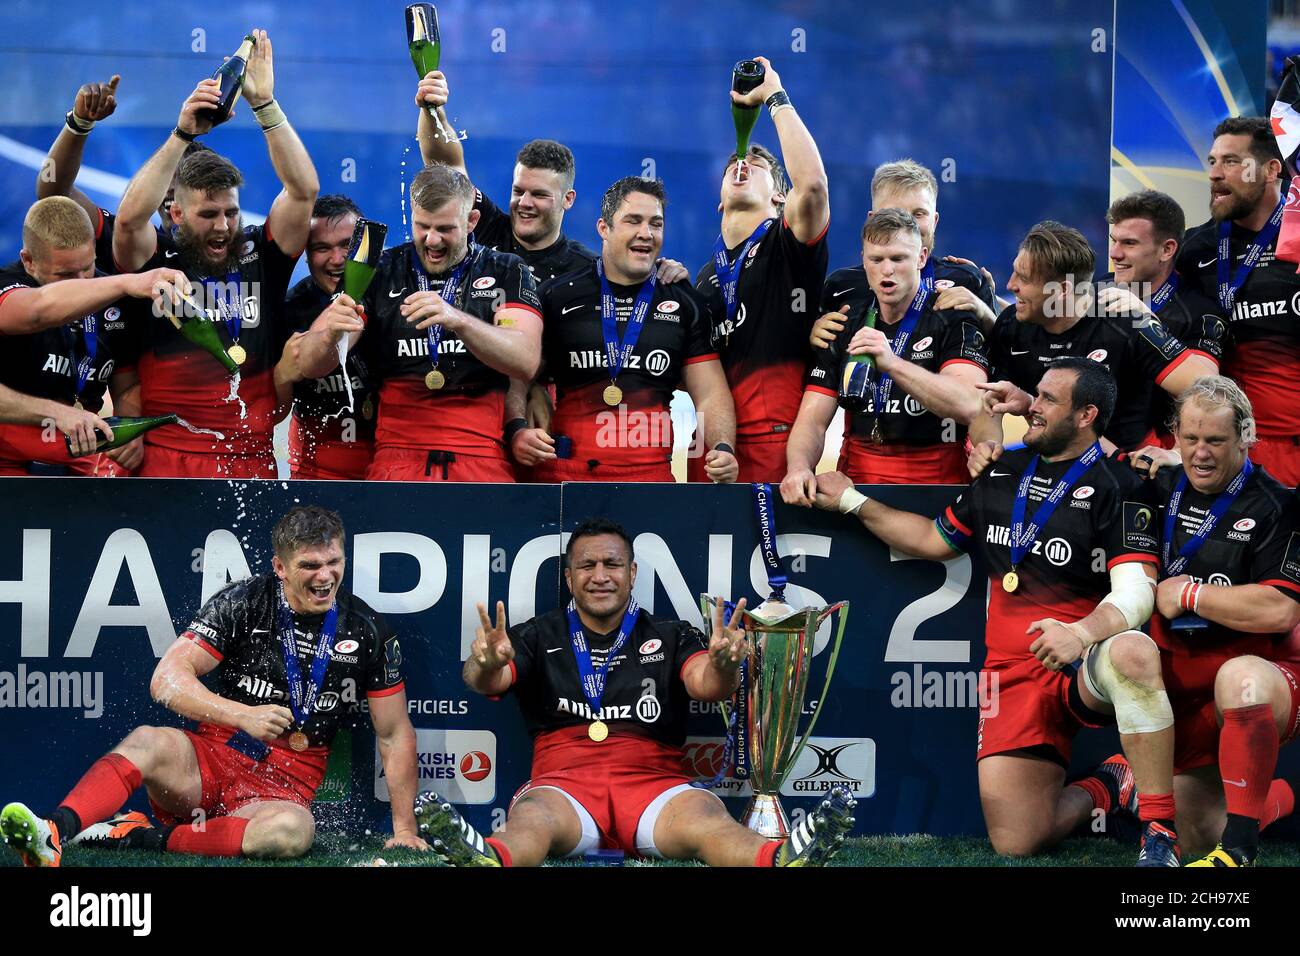 Saracens players celebrate winning the European Champions Cup trophy during the European Rugby Champions Cup Final at the Parc Olympique Lyonnais, Lyon. Stock Photo